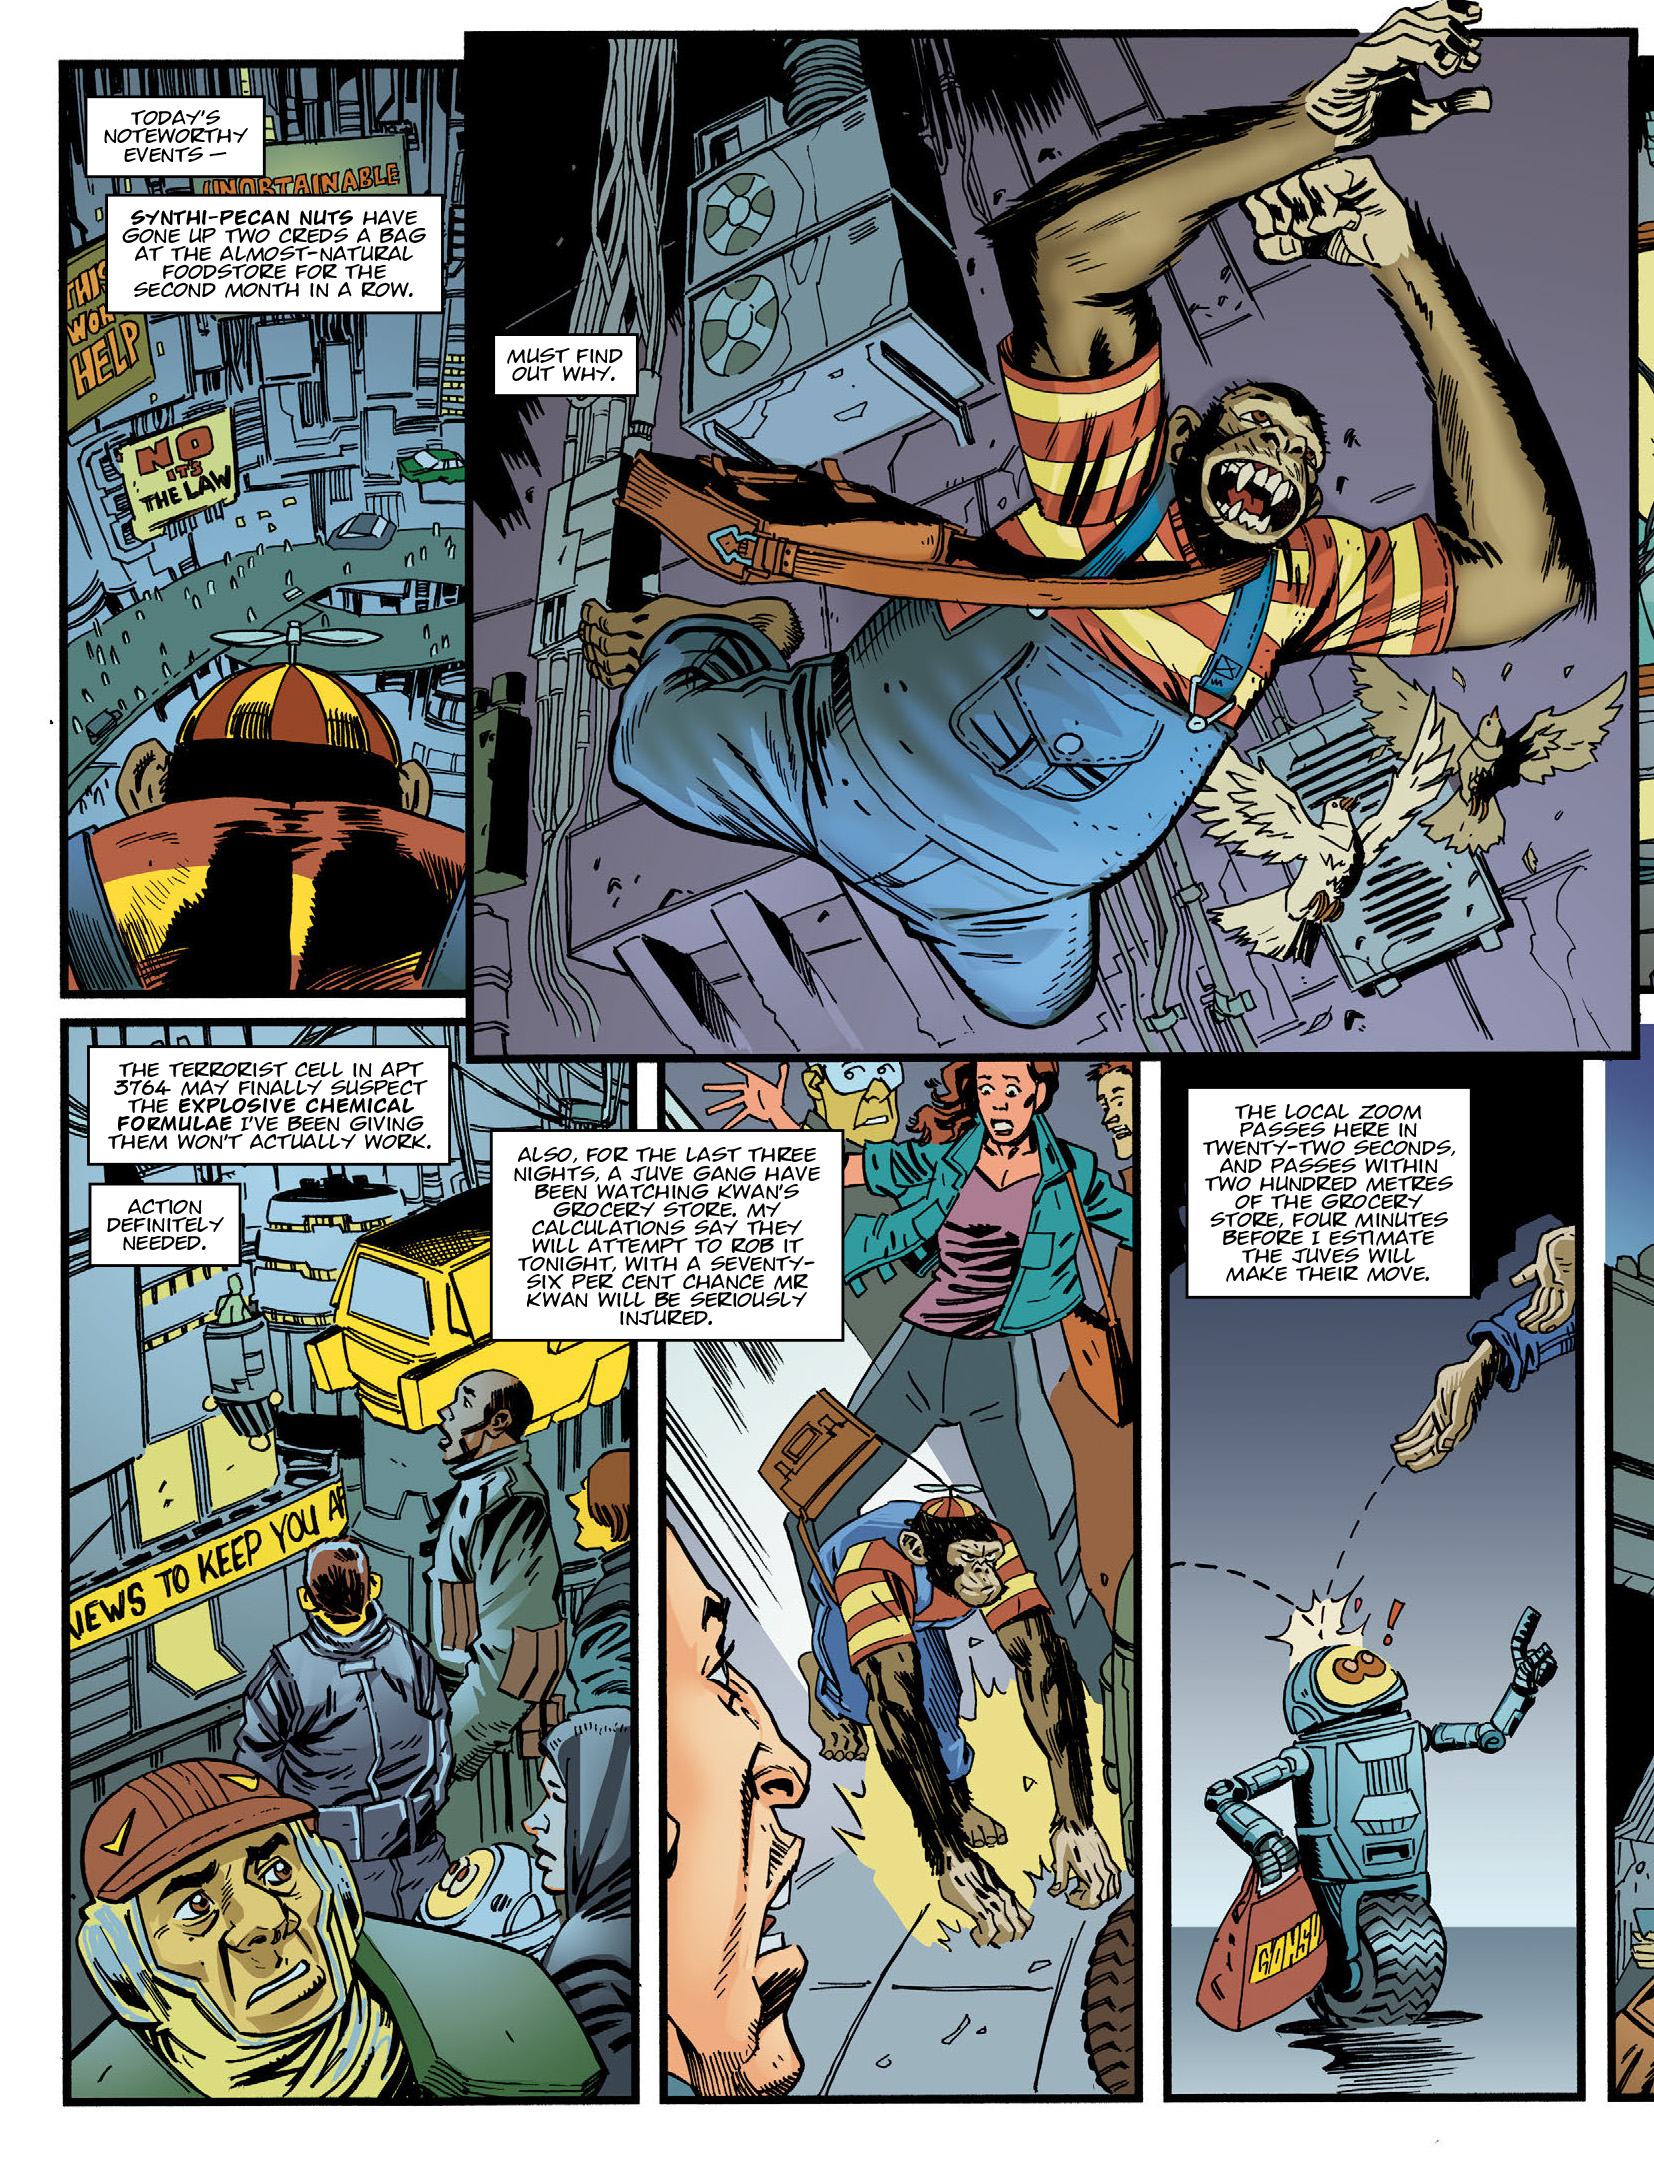 2000 AD: Chapter 2131 - Page 4